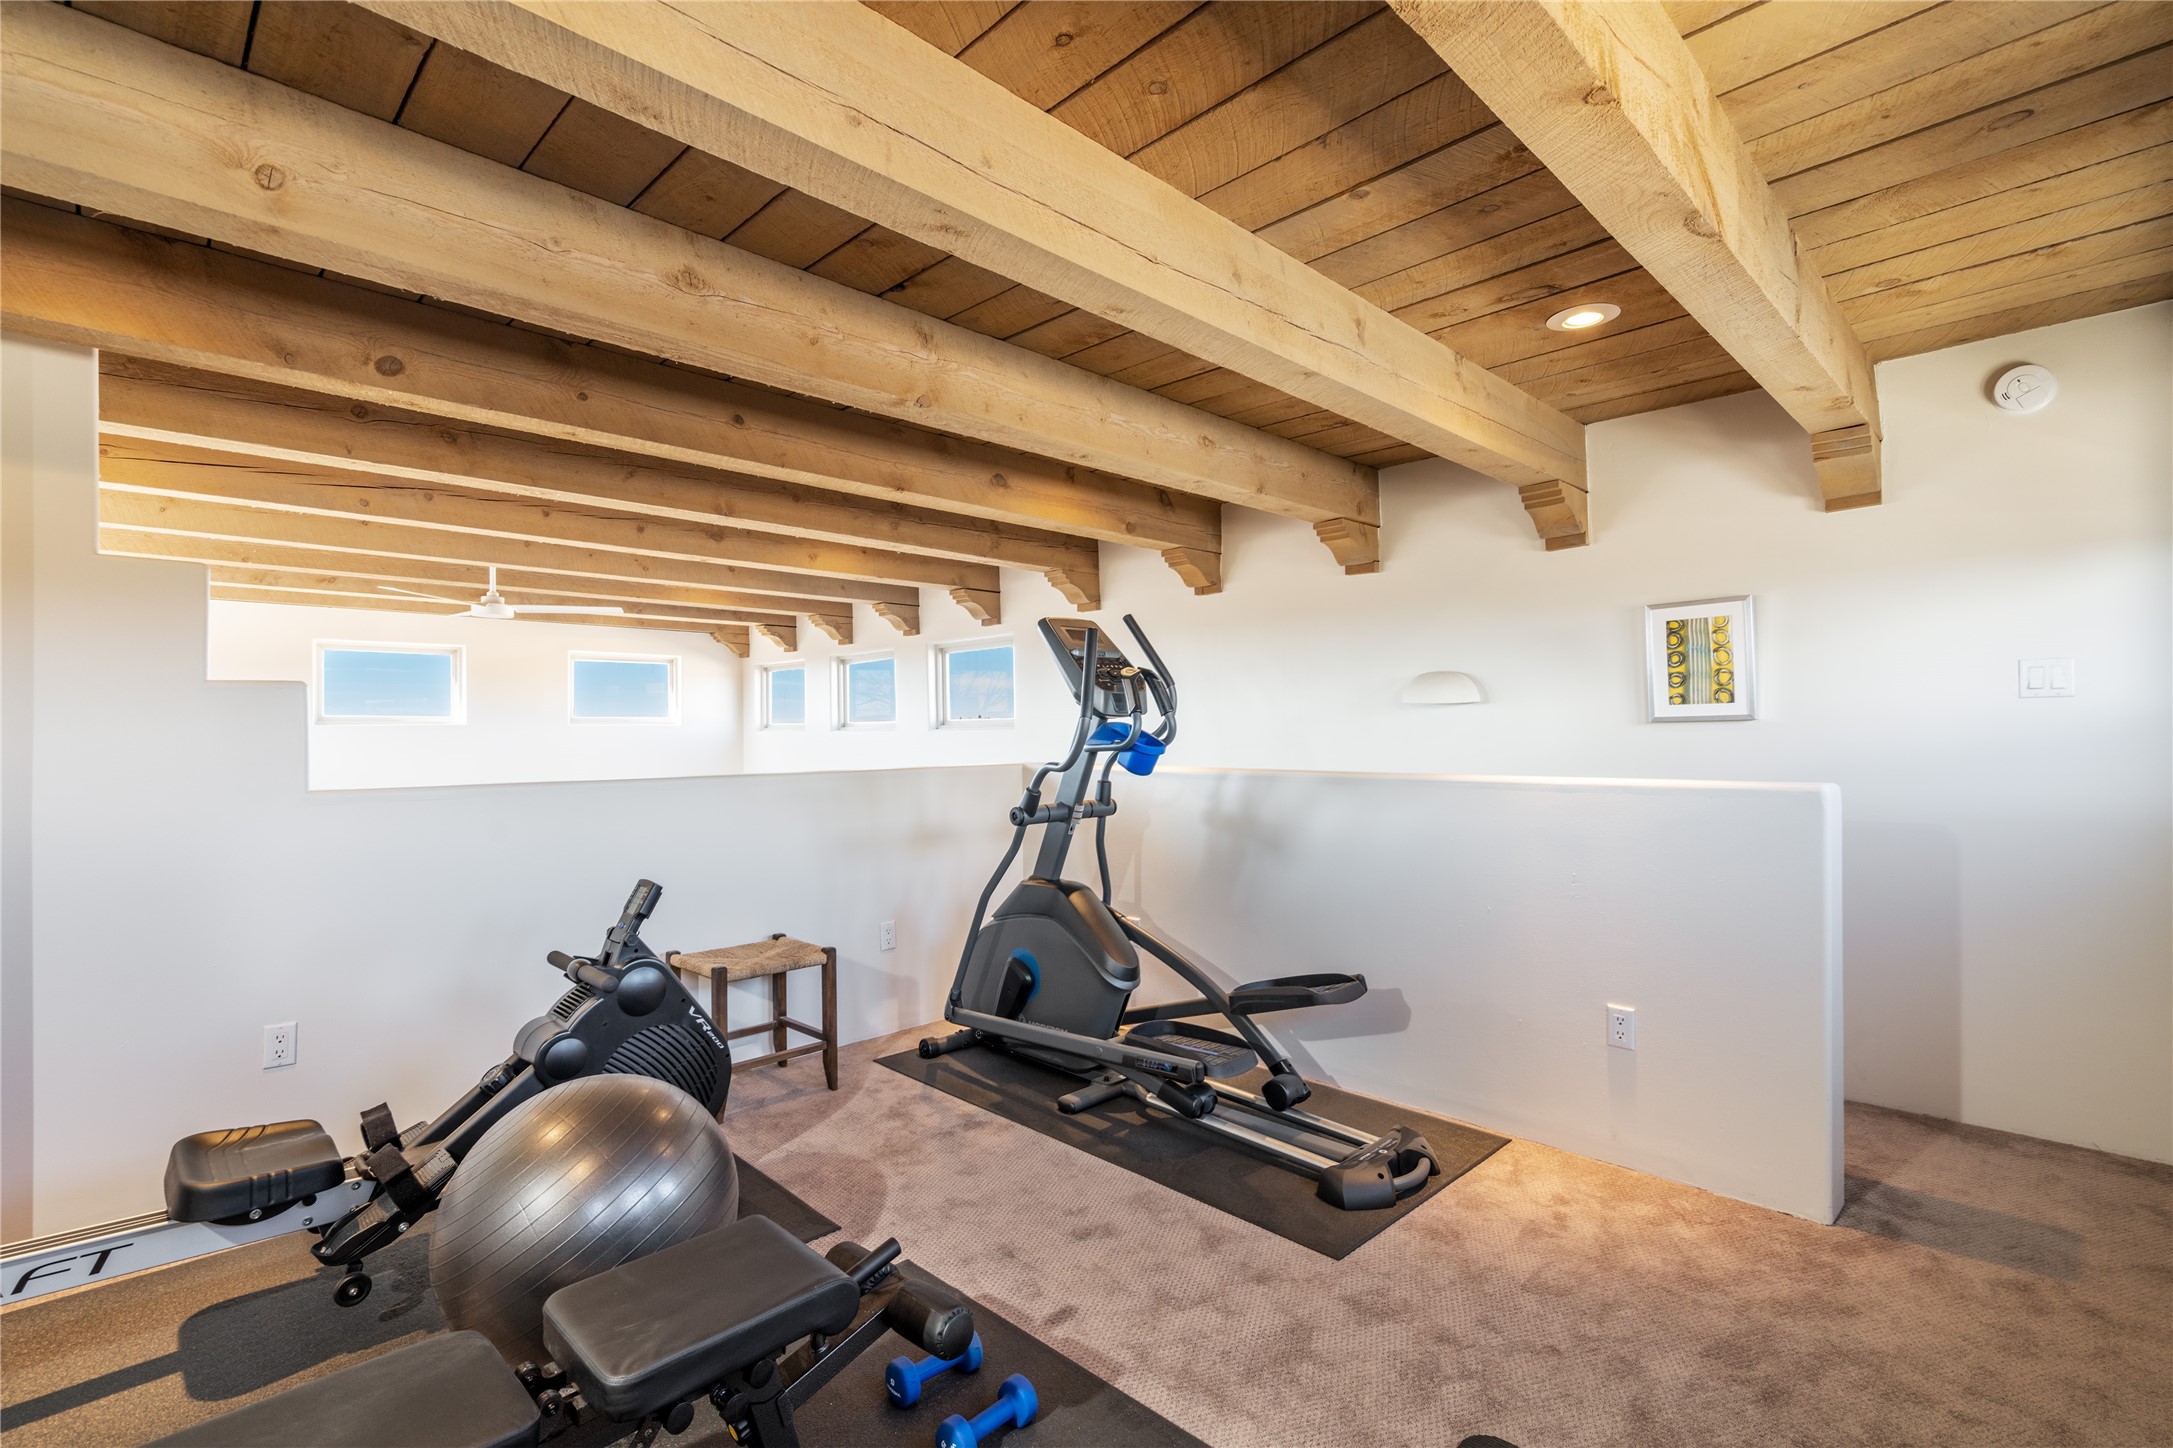 Loft space which is used as a gym-workout space